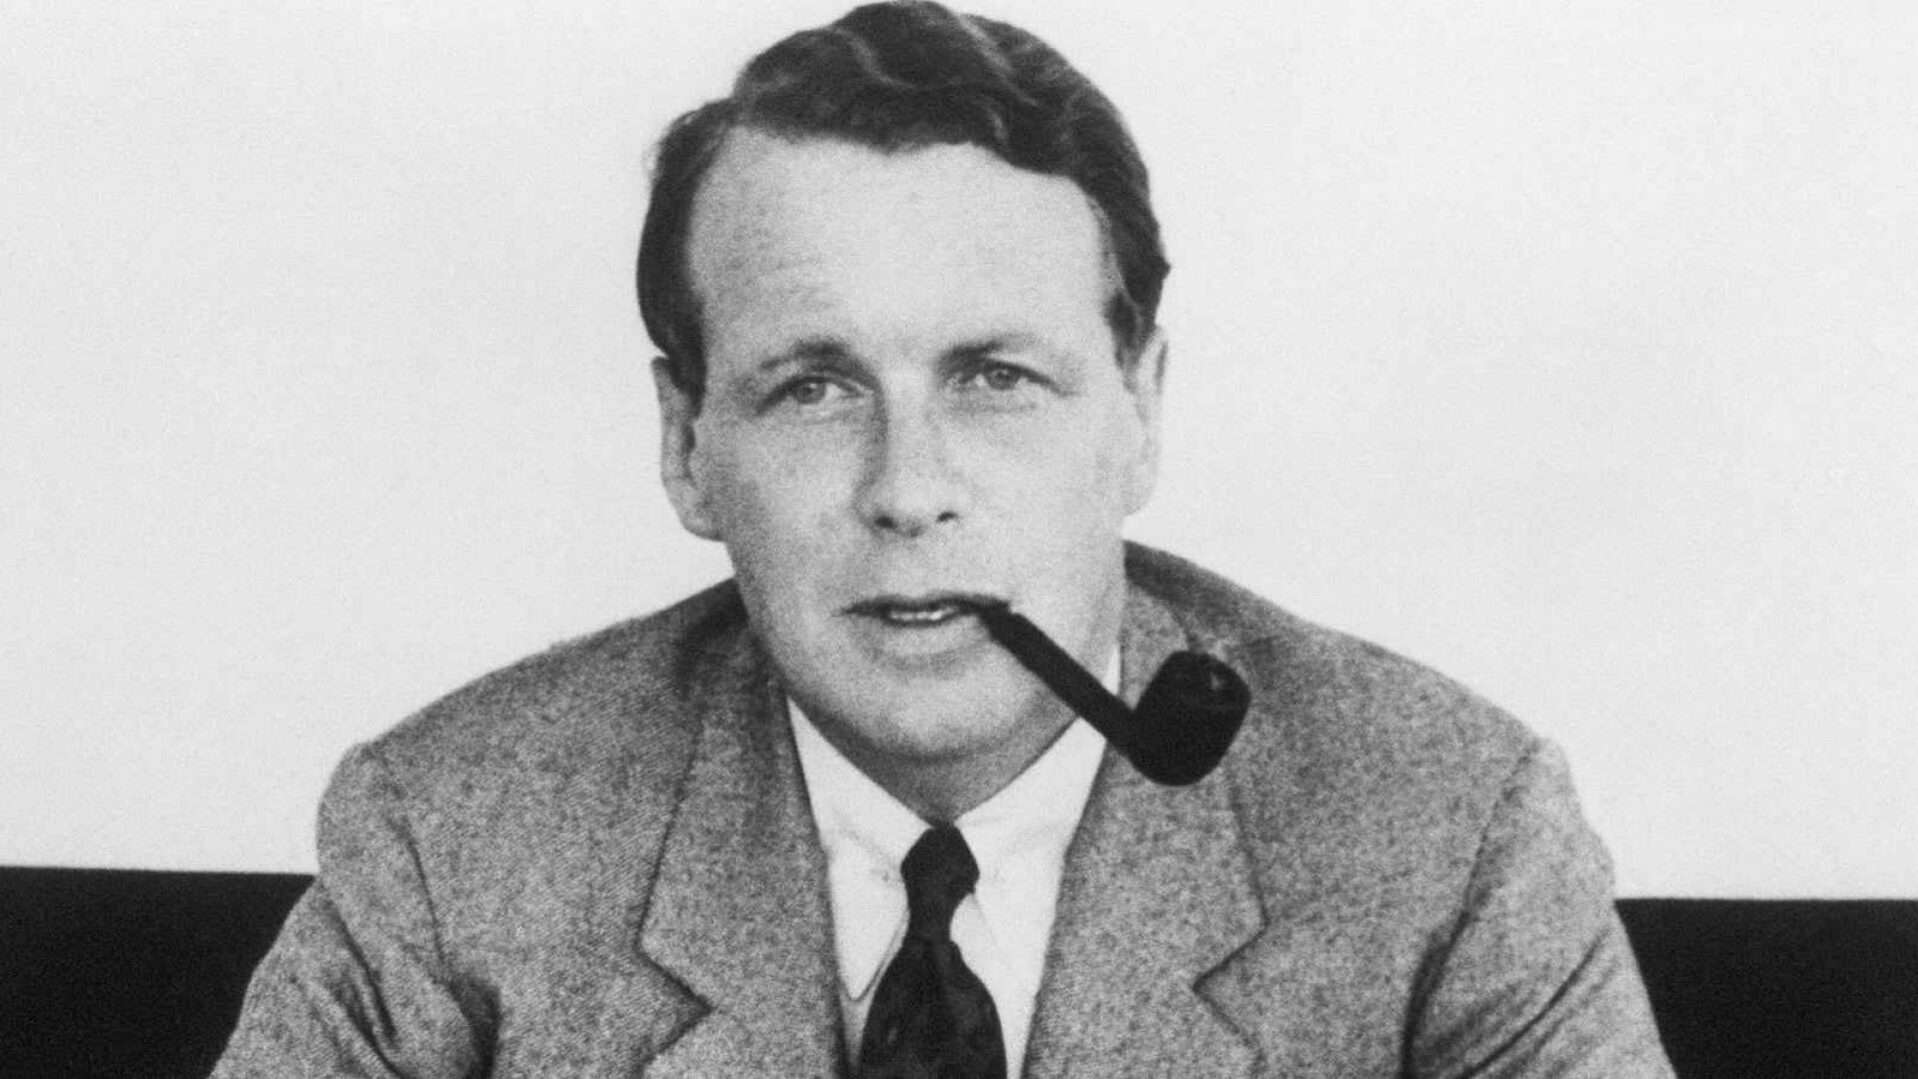 Who is David Ogilvy's wife?